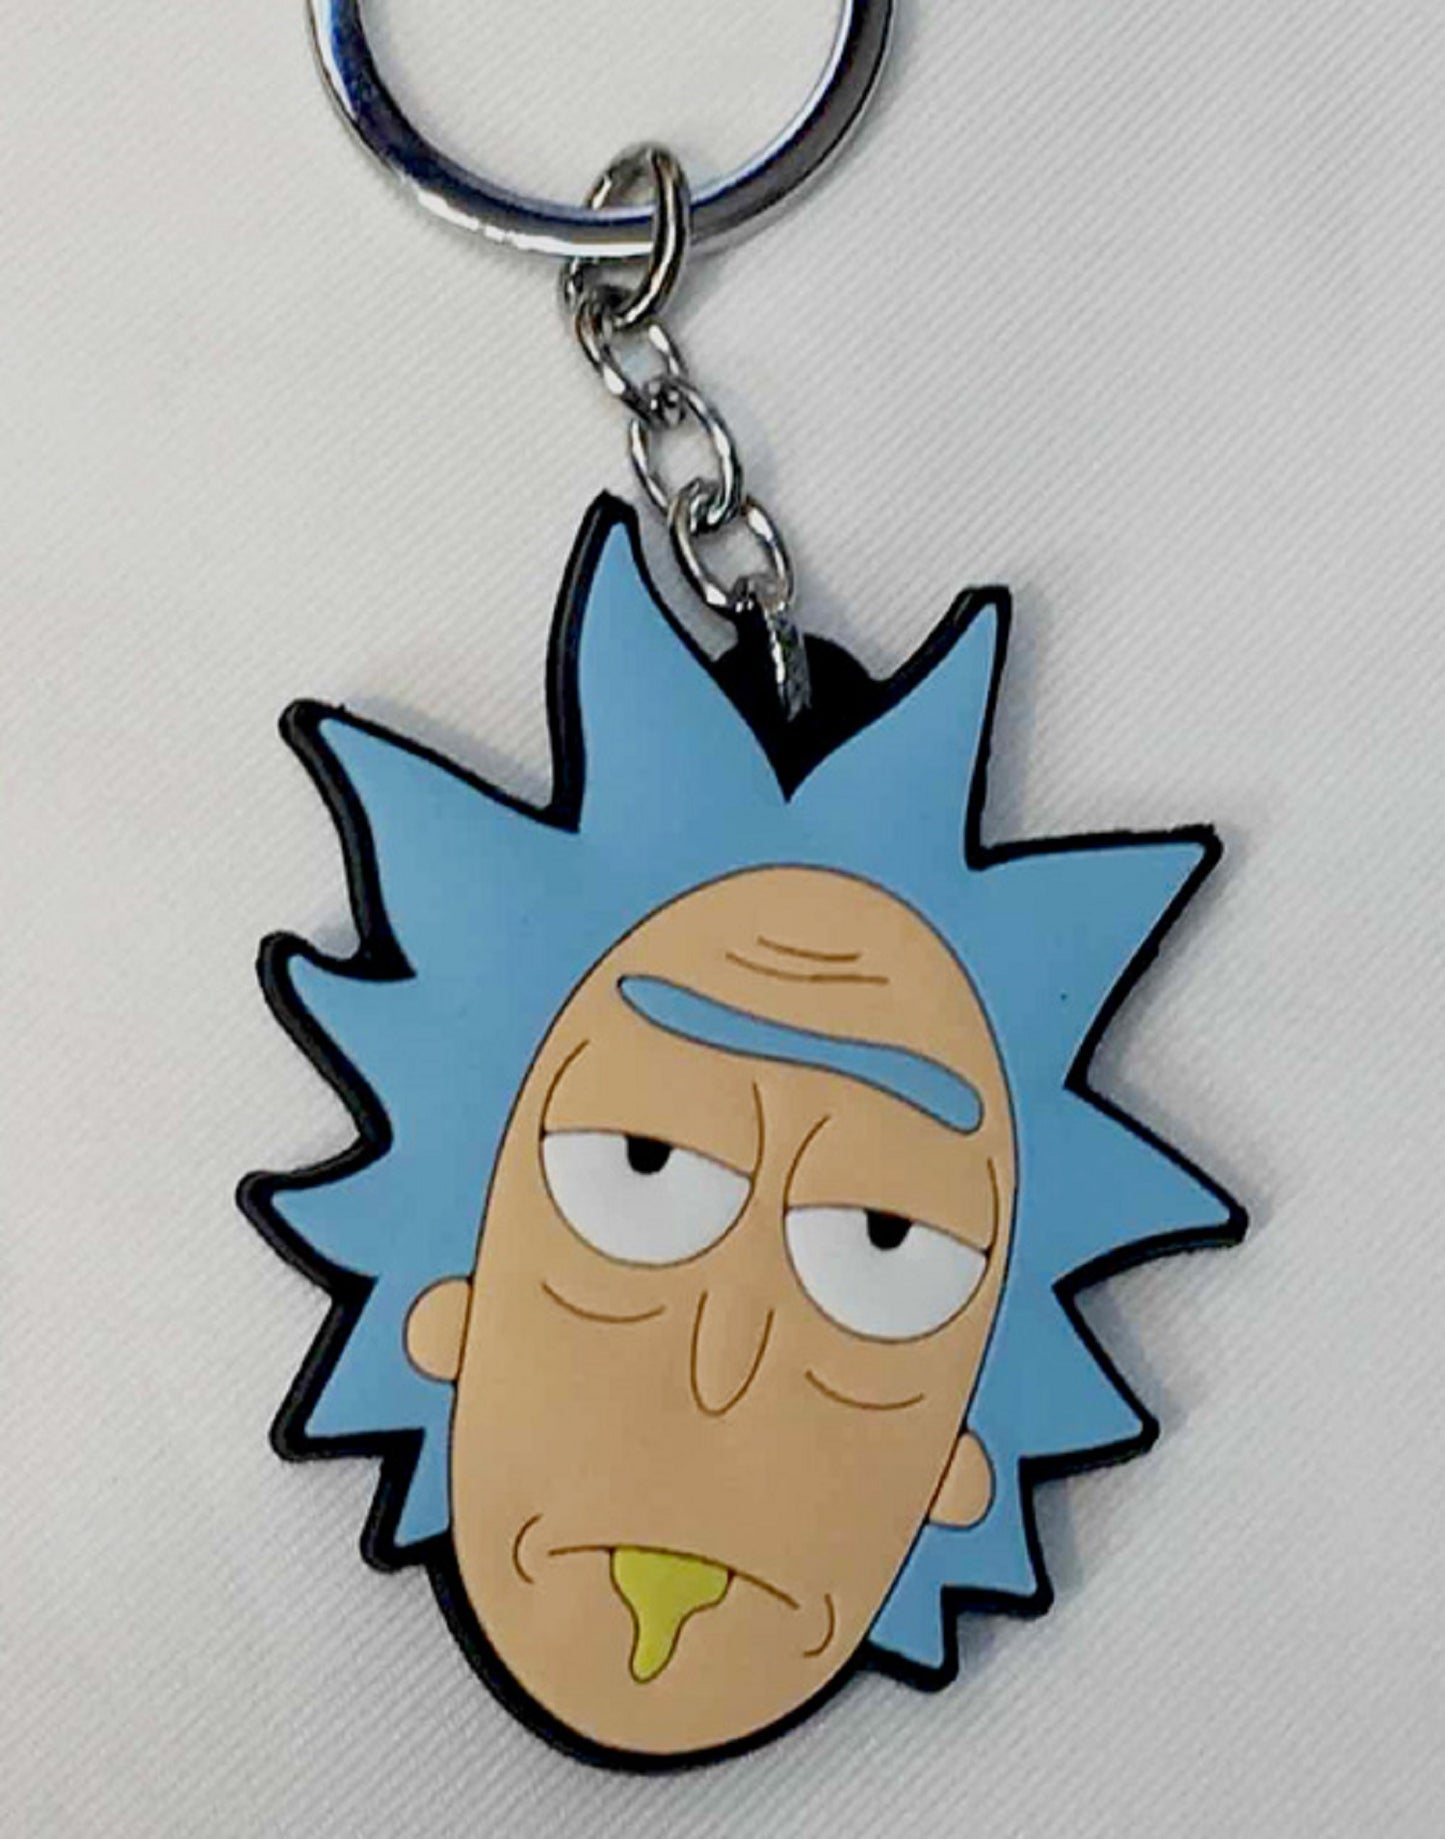 Rick and Morty Keychain - Super Anime Store FREE SHIPPING FAST SHIPPING USA